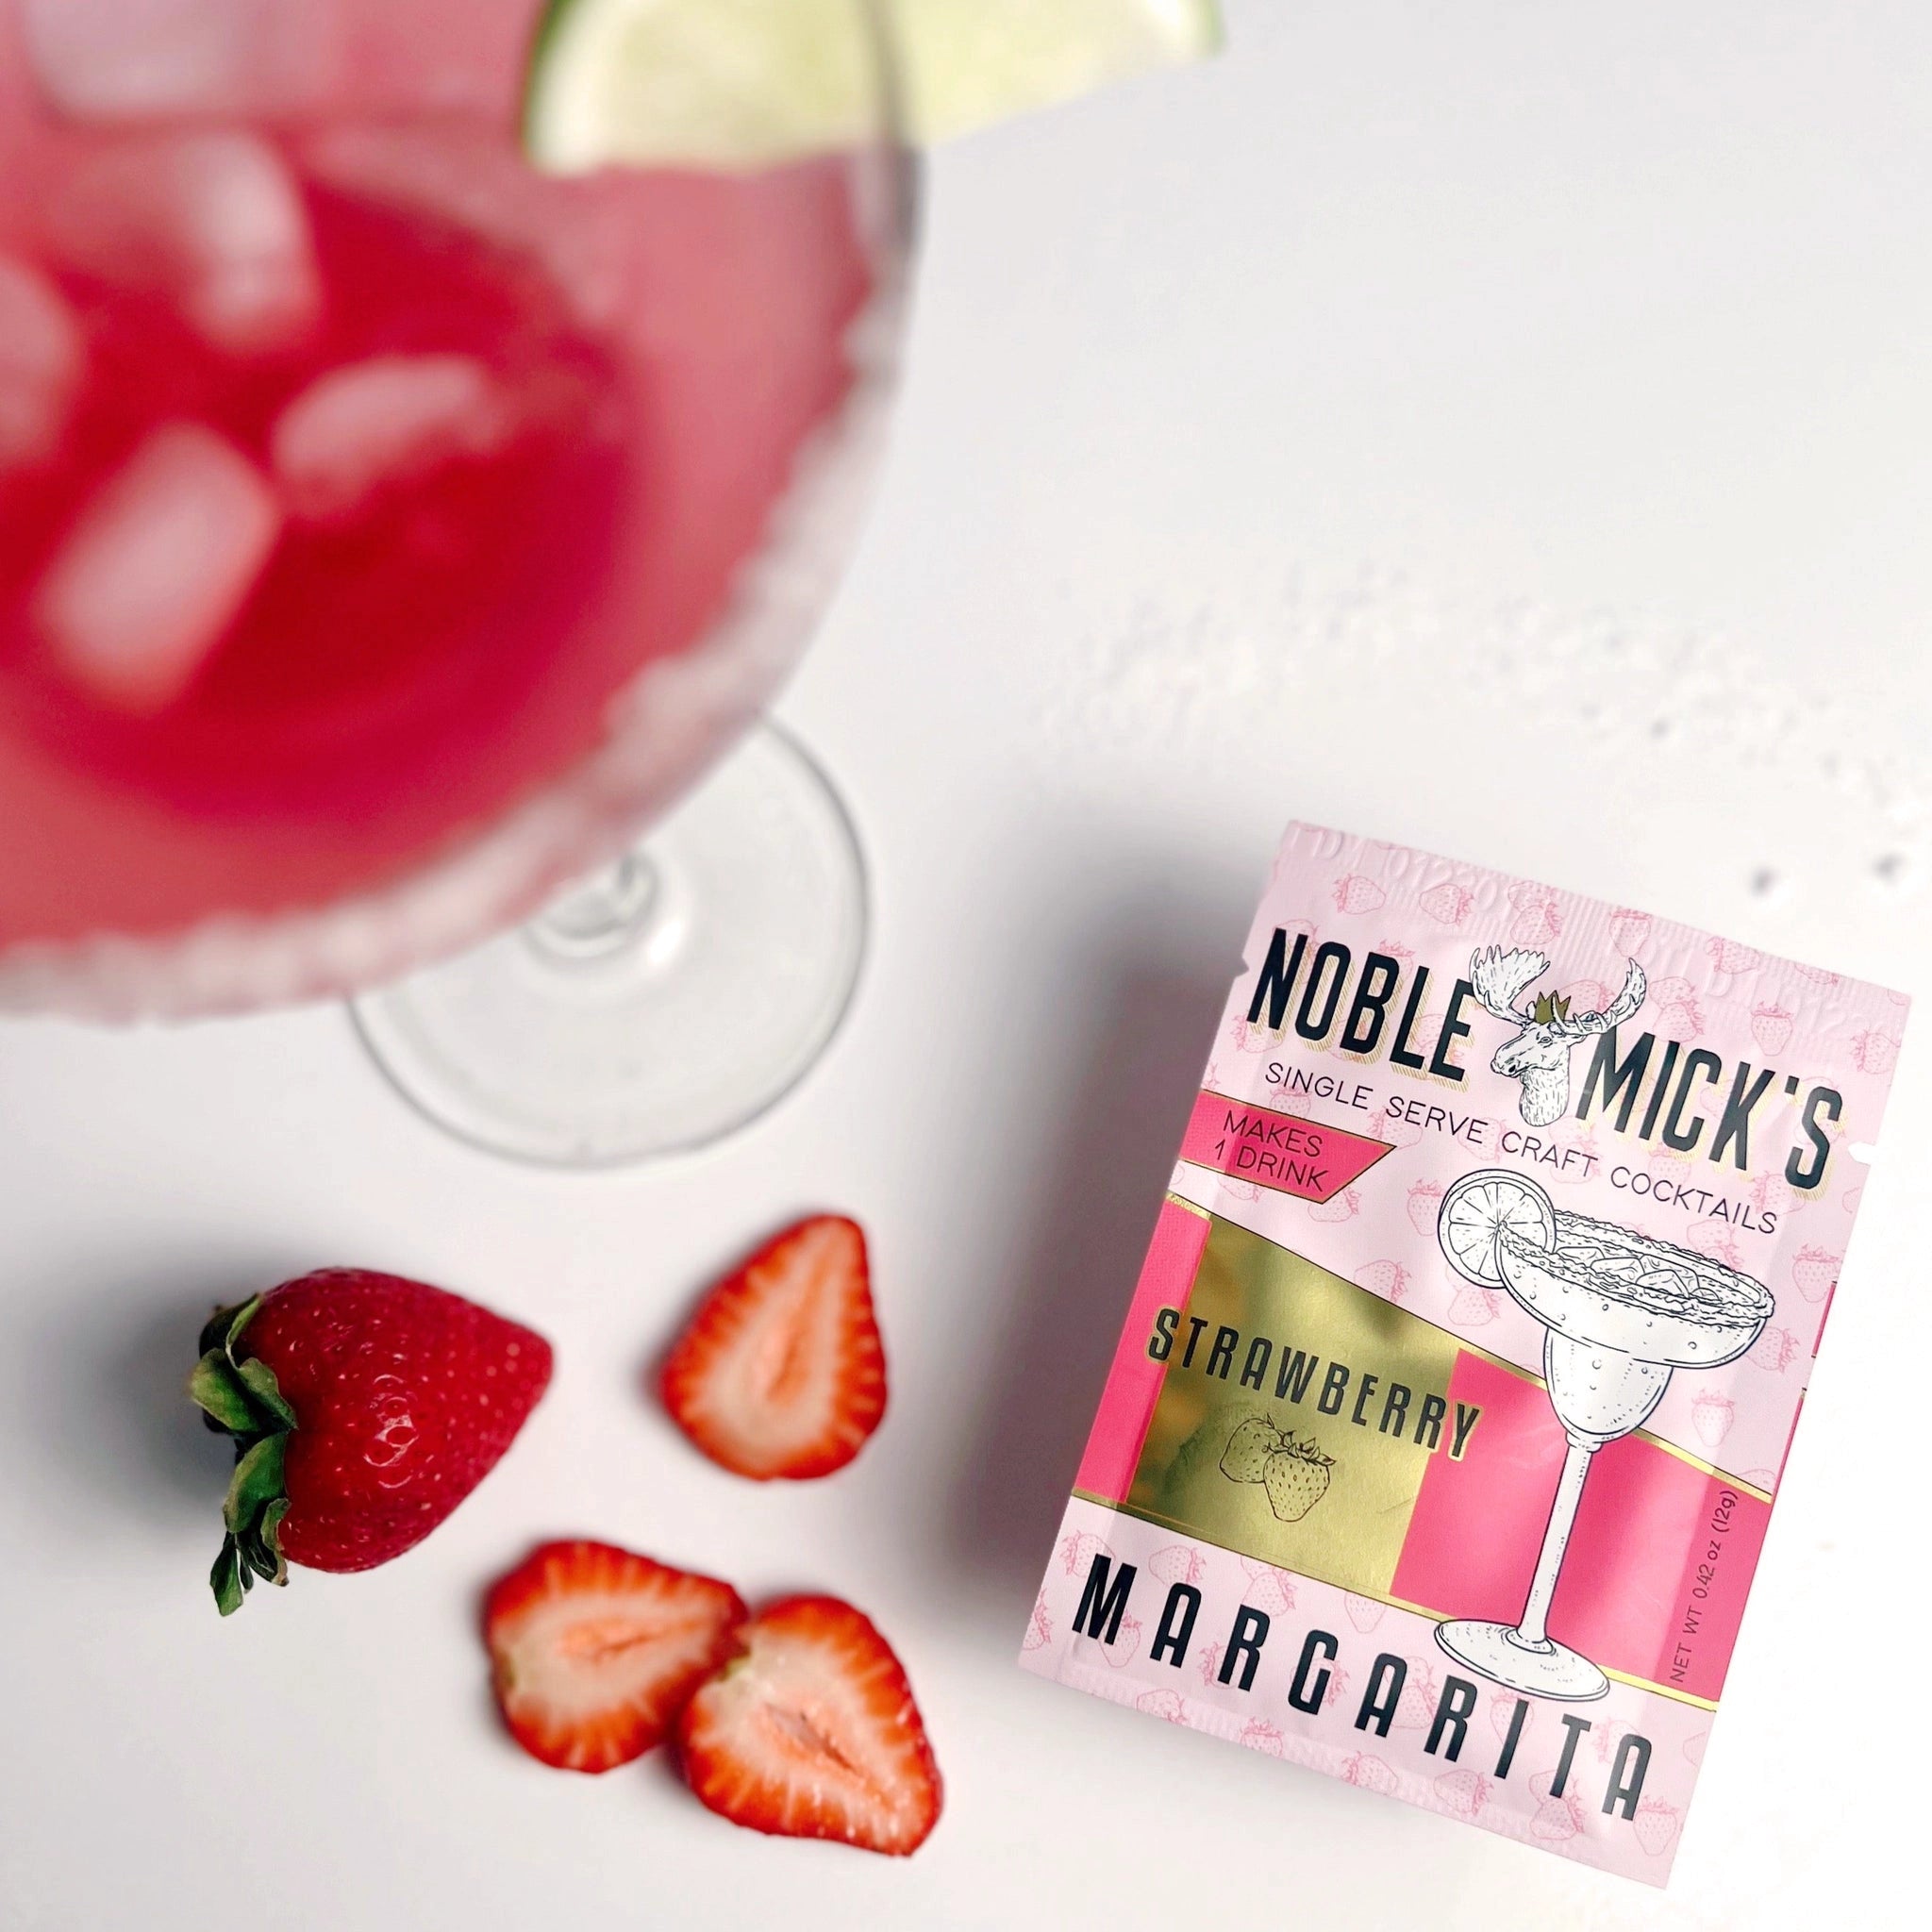 On a white background is a hot pink and light pink packet of cocktail mix that reads, &quot;Noble Micks Single Serve Craft Cocktails Strawberry Margarita&quot; photographed next to a strawberry and a few slices as well as a cocktail glass filled with a pink liquid. 